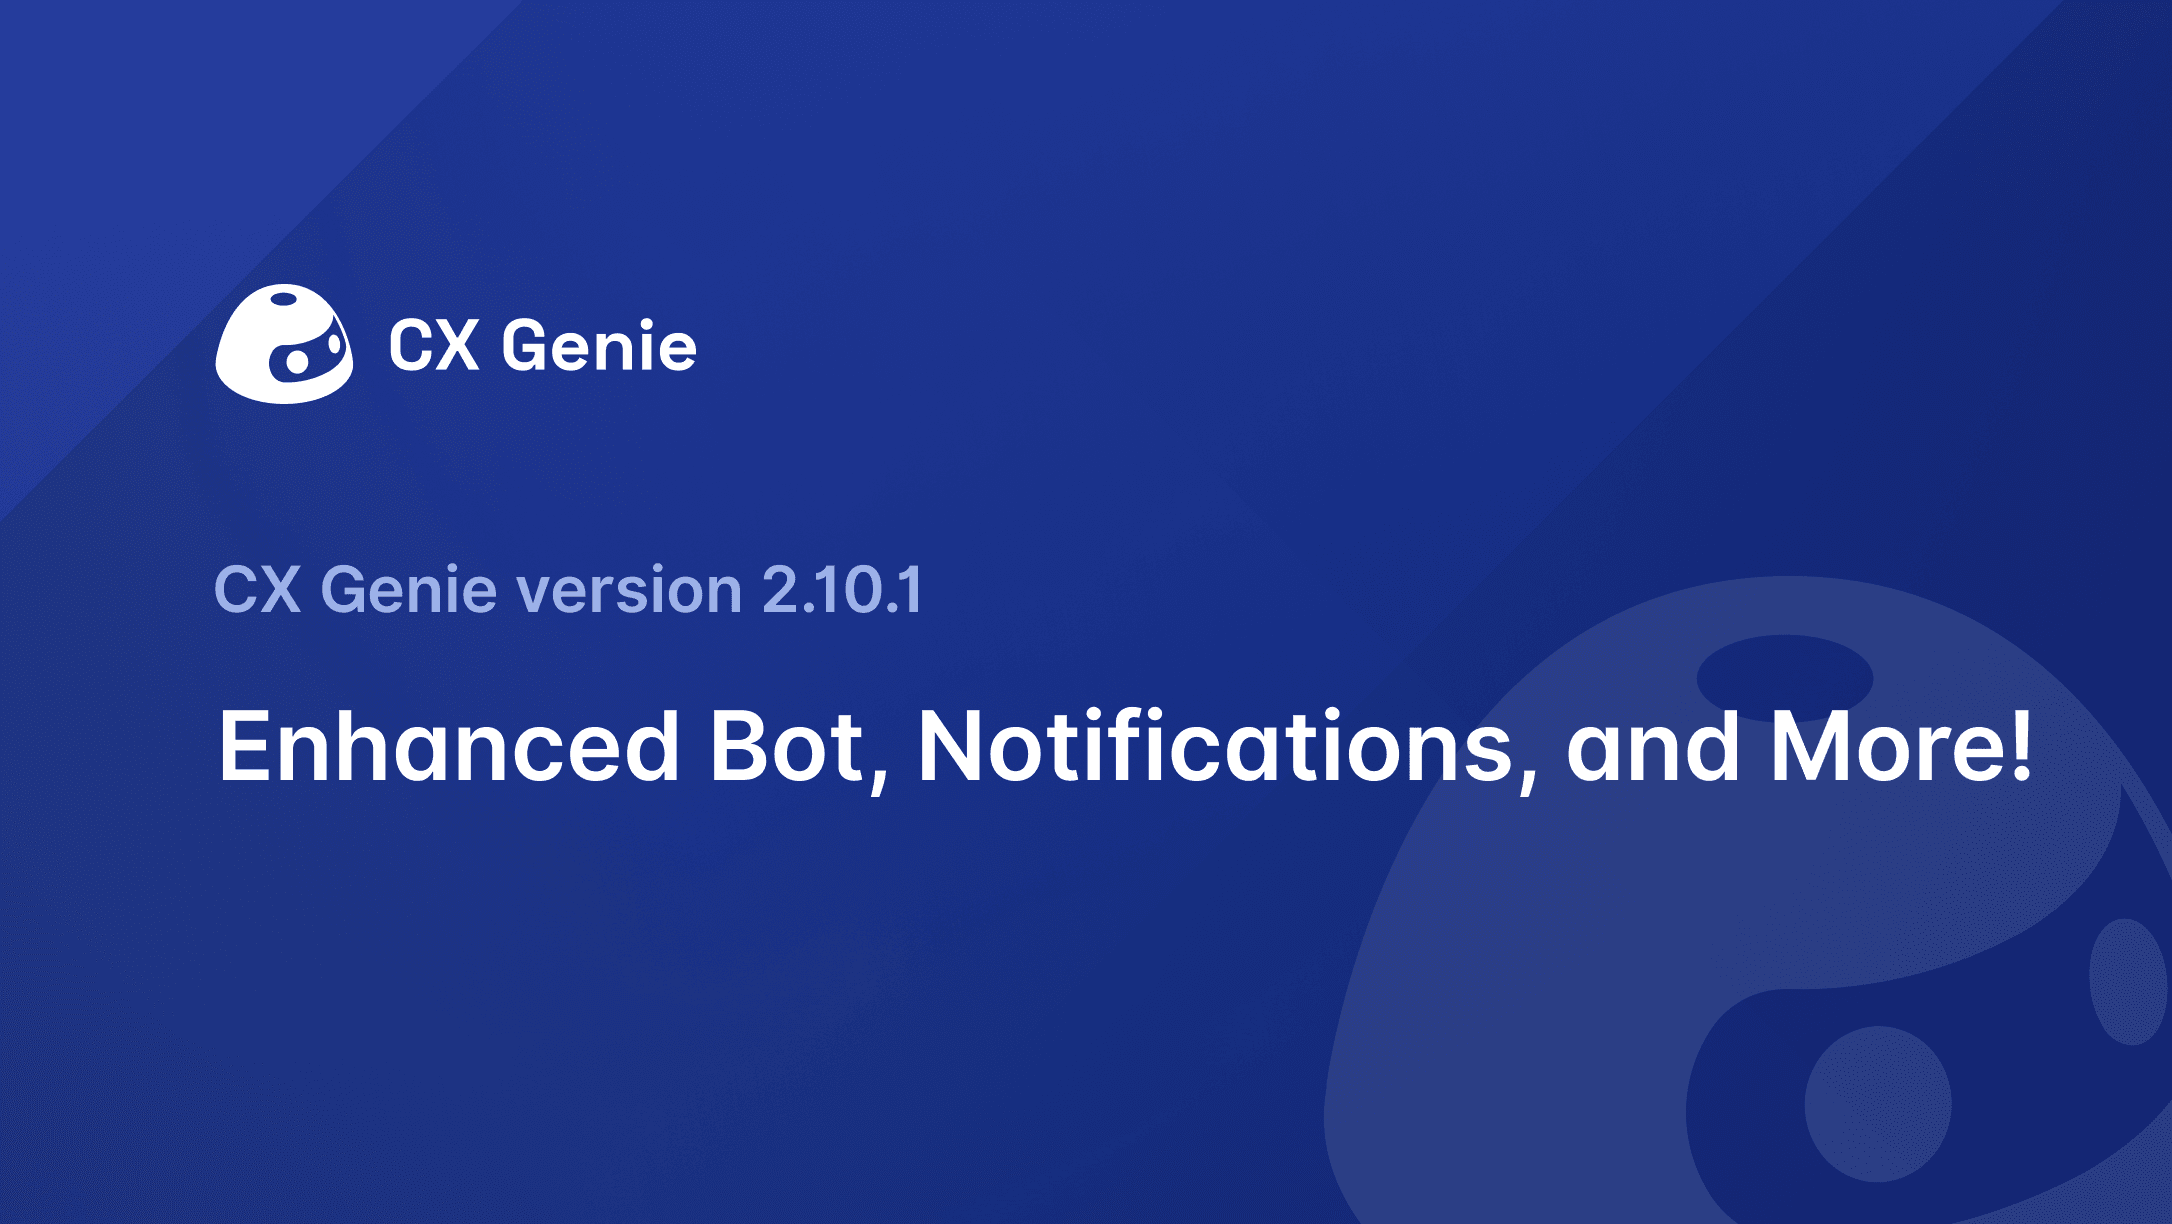 CX Genie Version 2.10.1: Enhanced Bot, Notifications, and More!